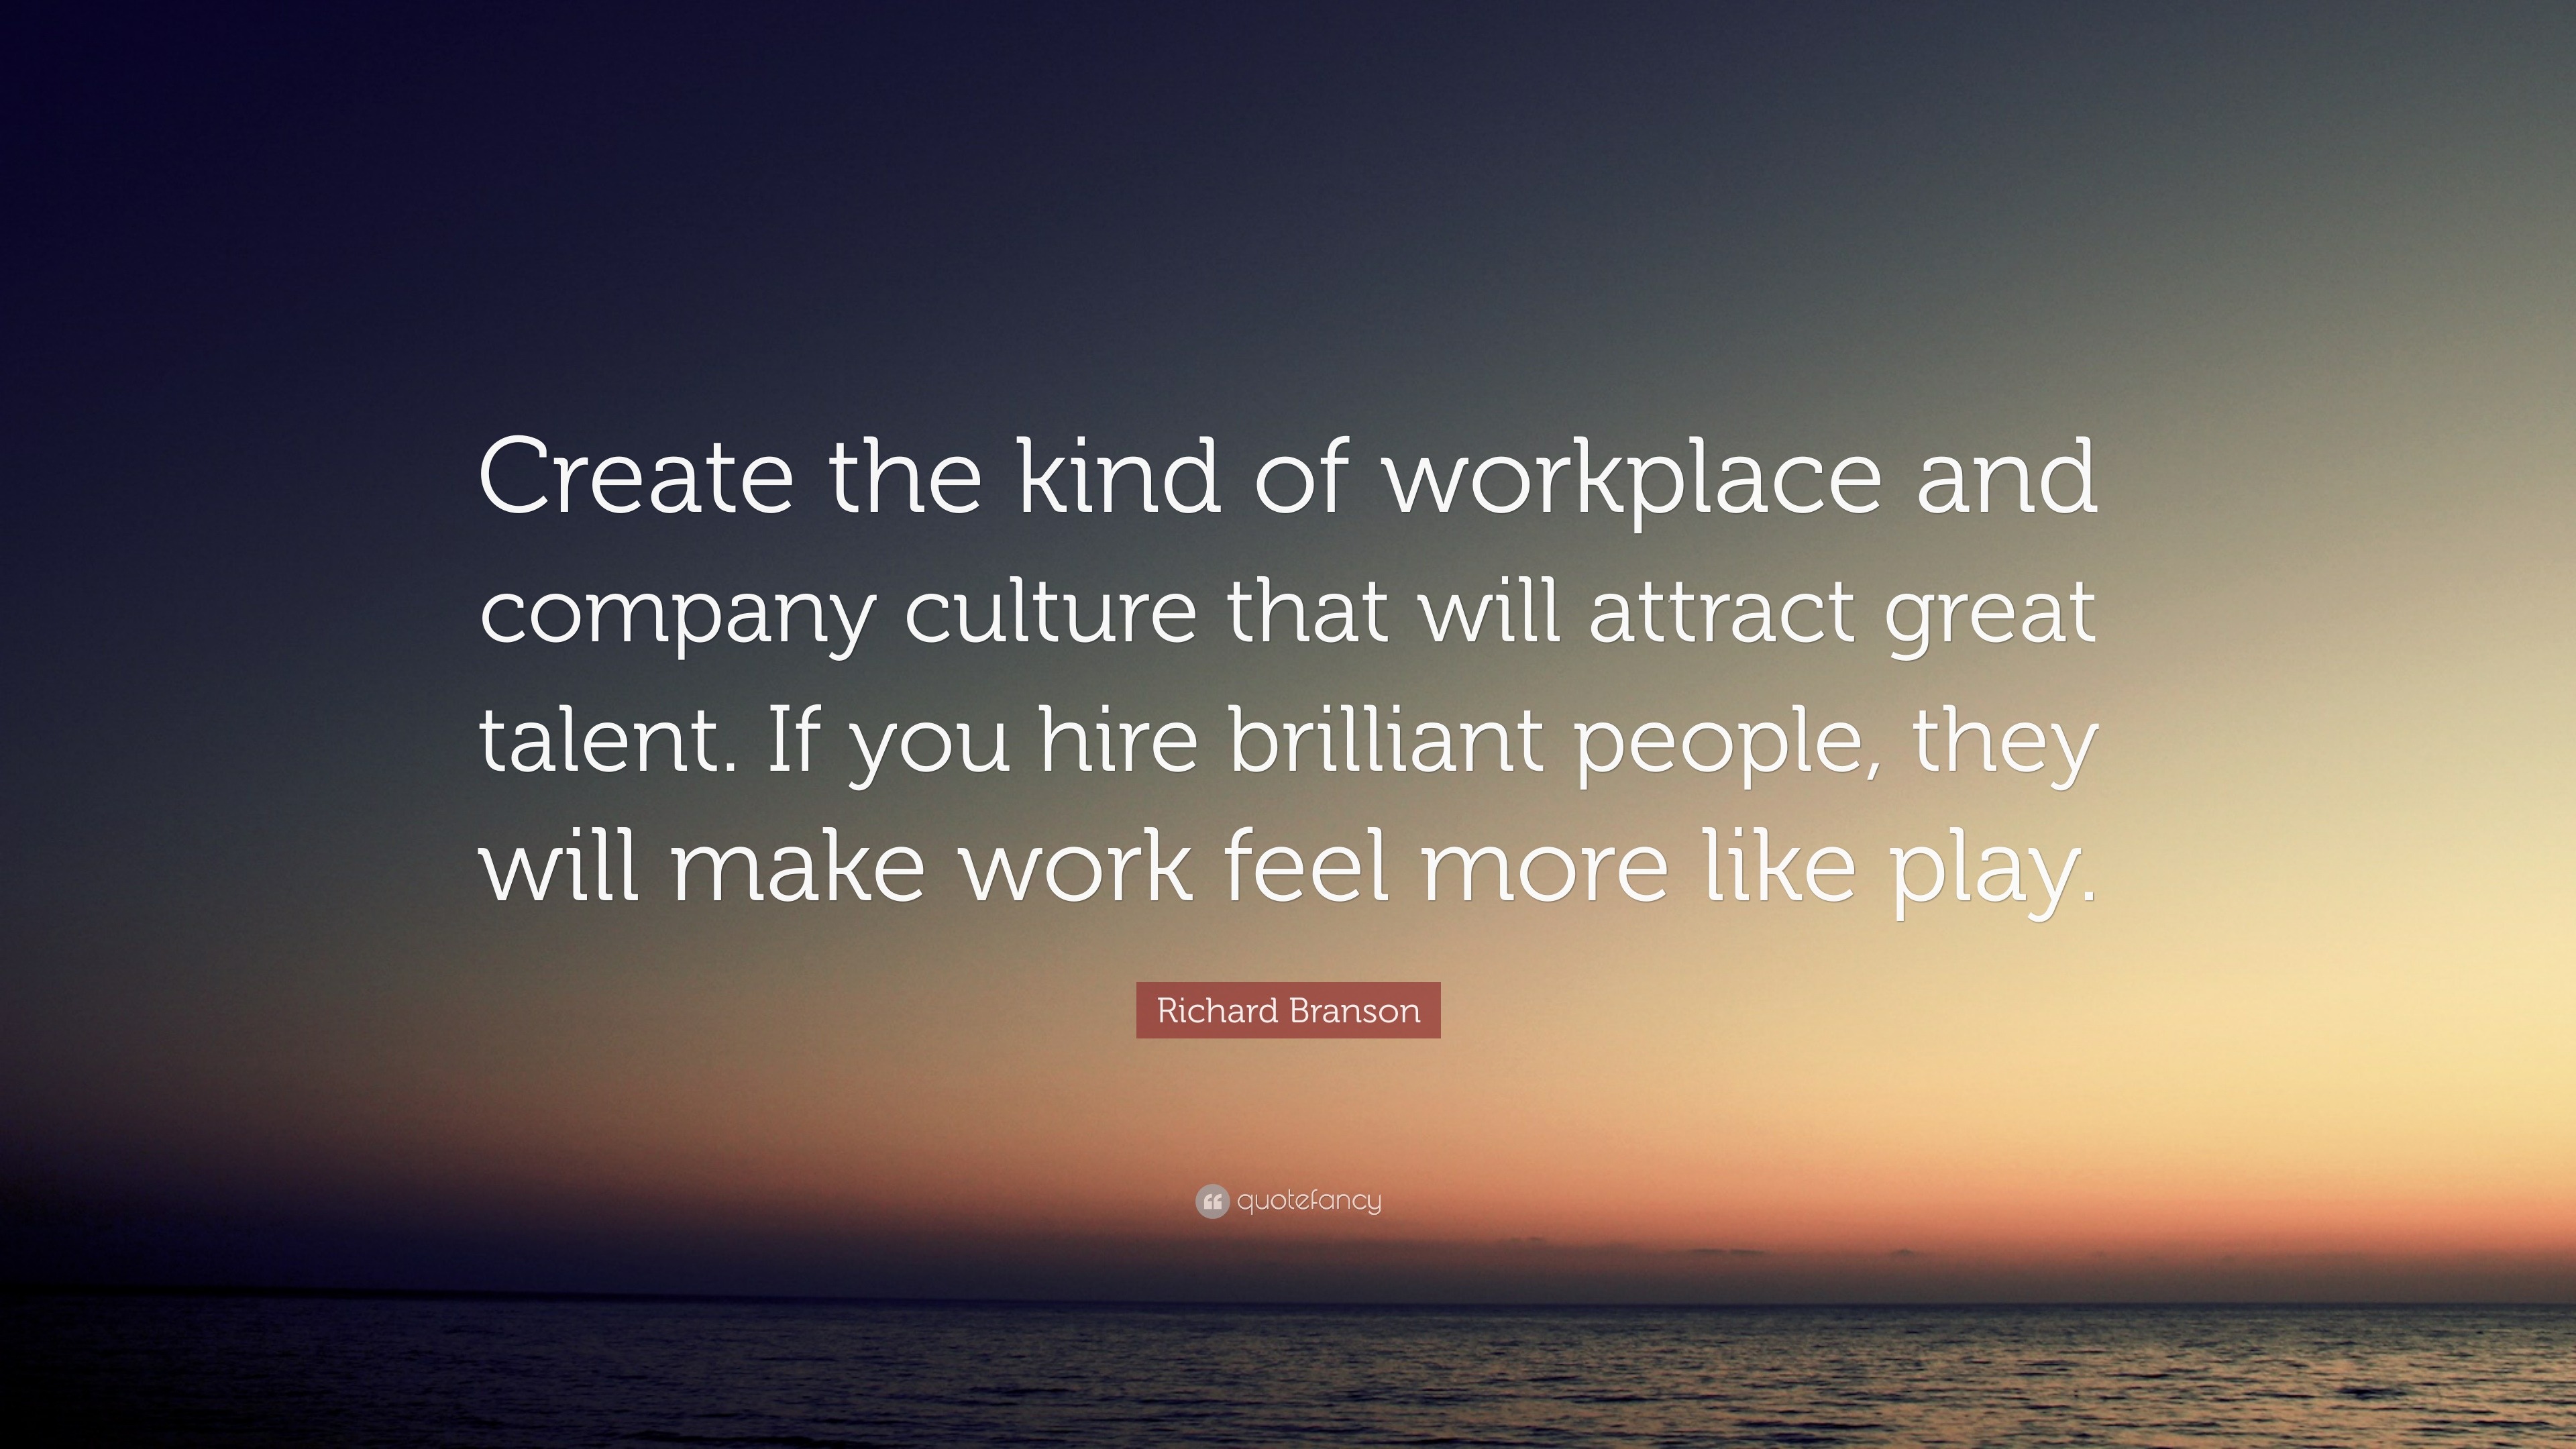 Richard Branson Quote: “Create the kind of workplace and company